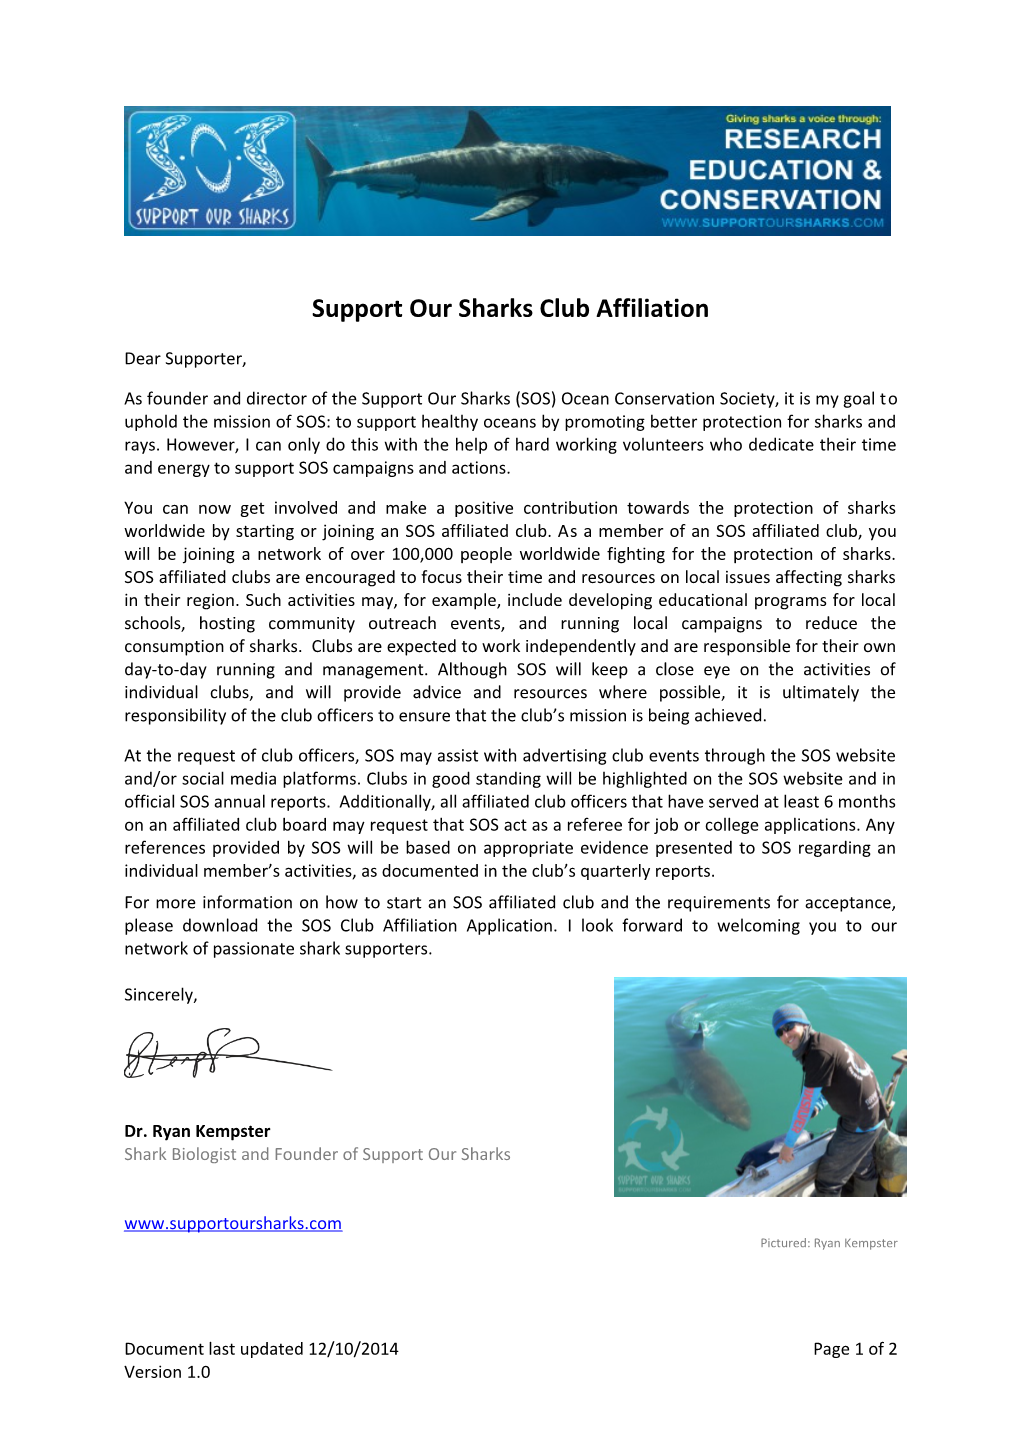 Support Our Sharks Club Affiliation